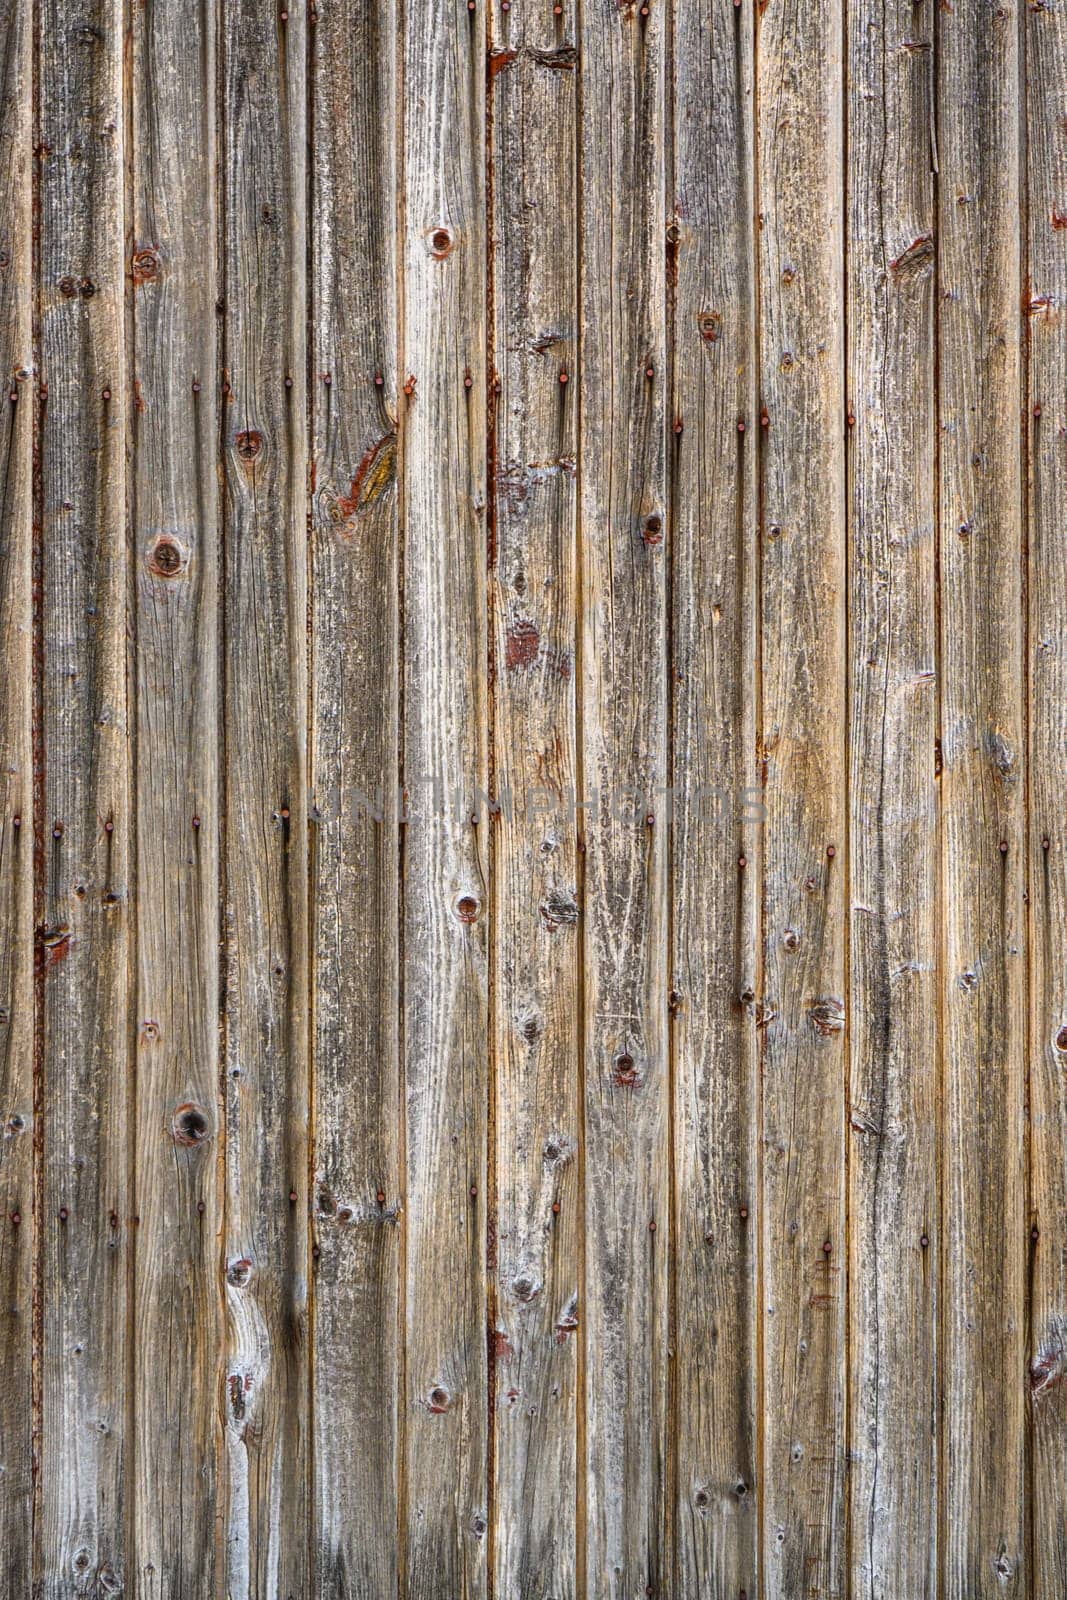 Background made of a textured old wood 6 by Mixa74